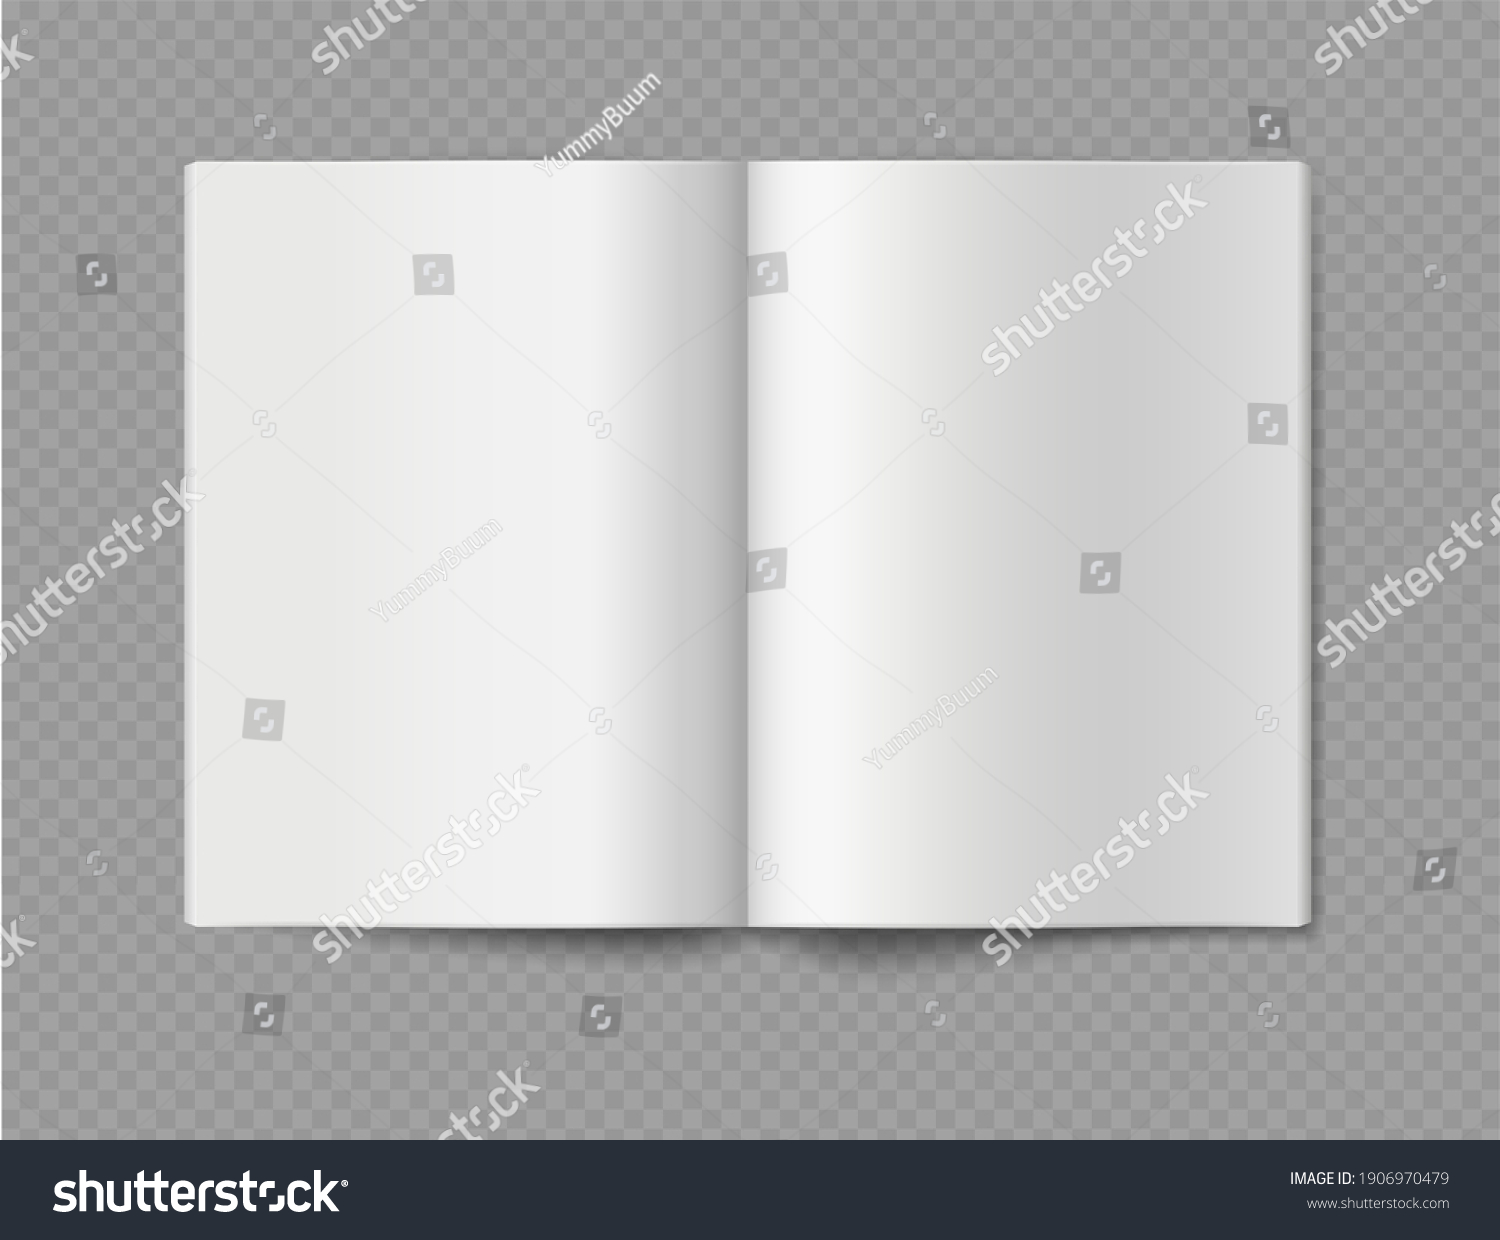 Empty book mockup. Opened 3d realistic booklet or brochure soft cover, album or catalog, journal or magazine template, blank white paper sheets, vector single object isolated on transparent background #1906970479